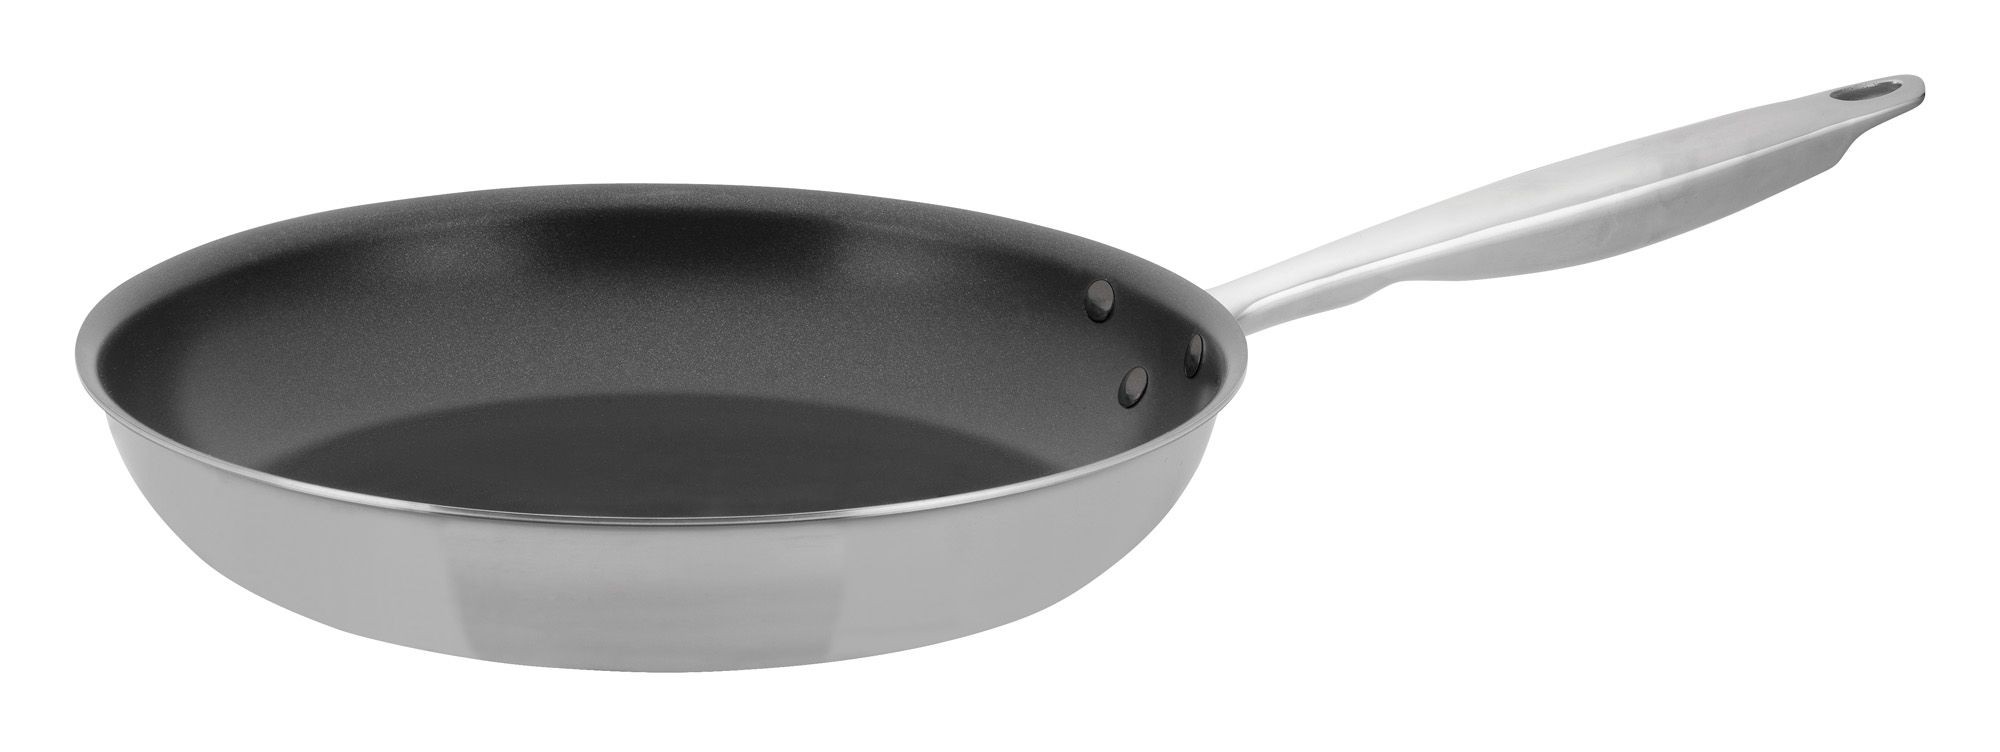 Winco TGFP-12NS Tri-Ply Excalibur Stainless Steel Non-Stick Fry Pan, 12"